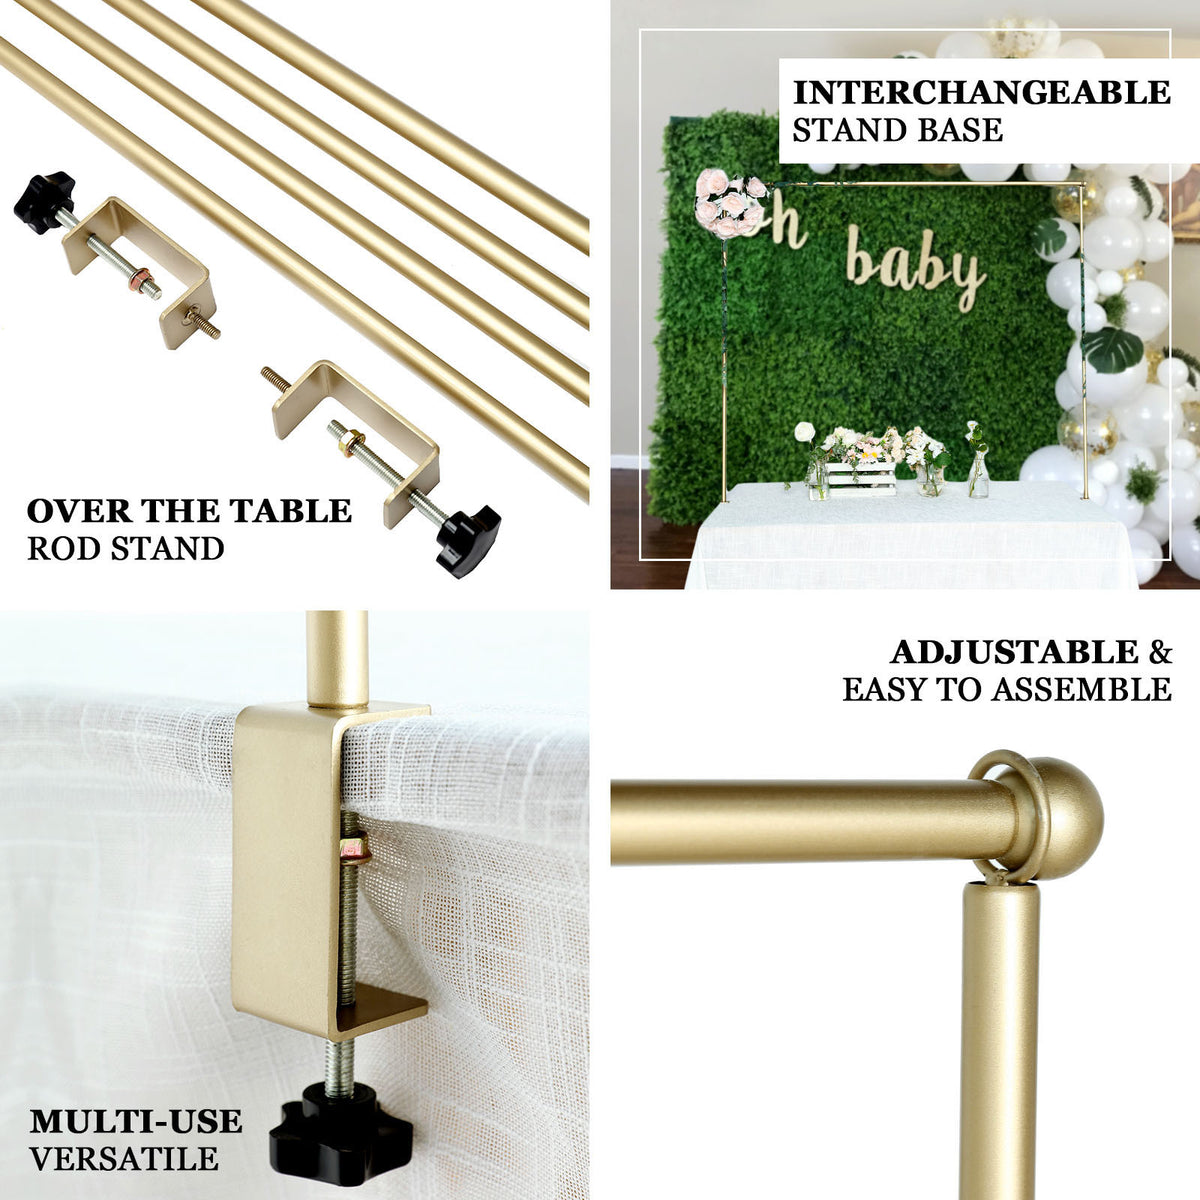 42 Tall Adjustable Over The Table Rod Stand Metal Arch - Gold